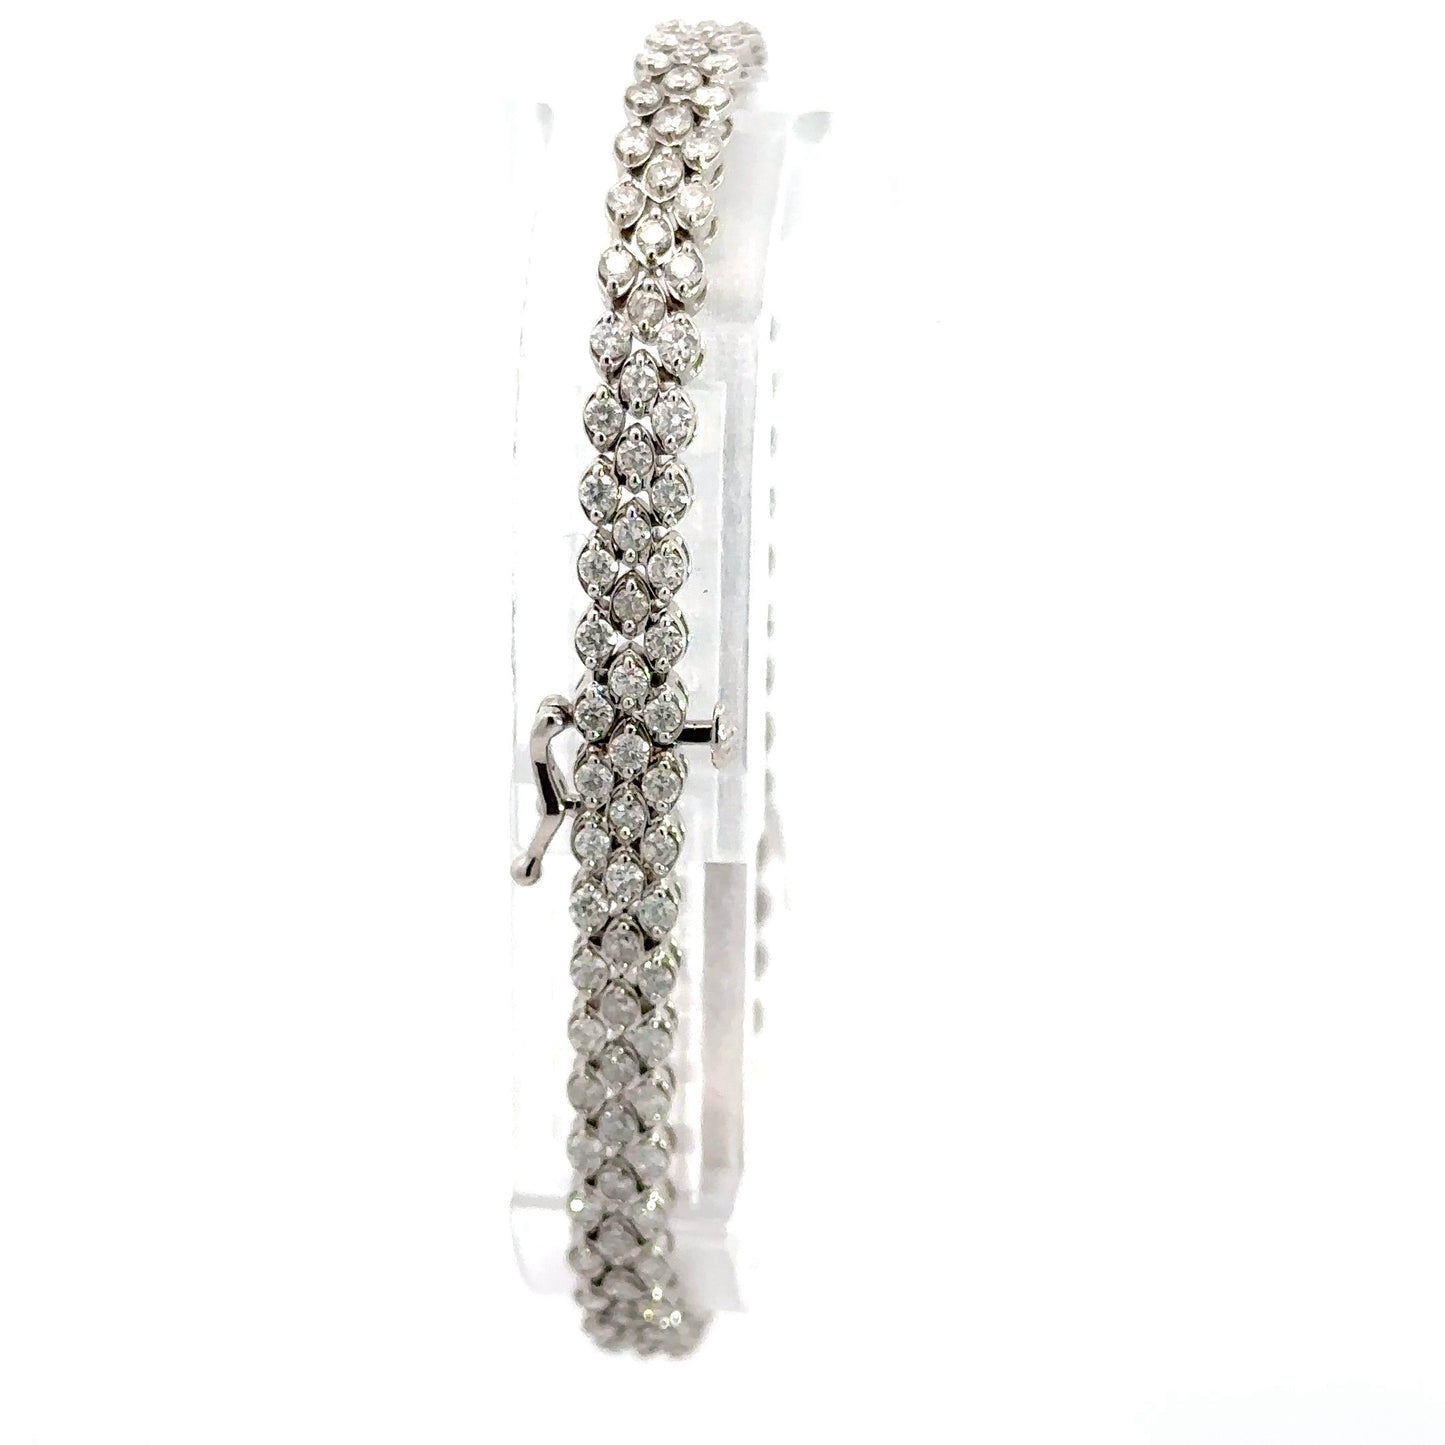 Back of diamond bracelet showing clasp and safety lock with diamonds throughout bracelet